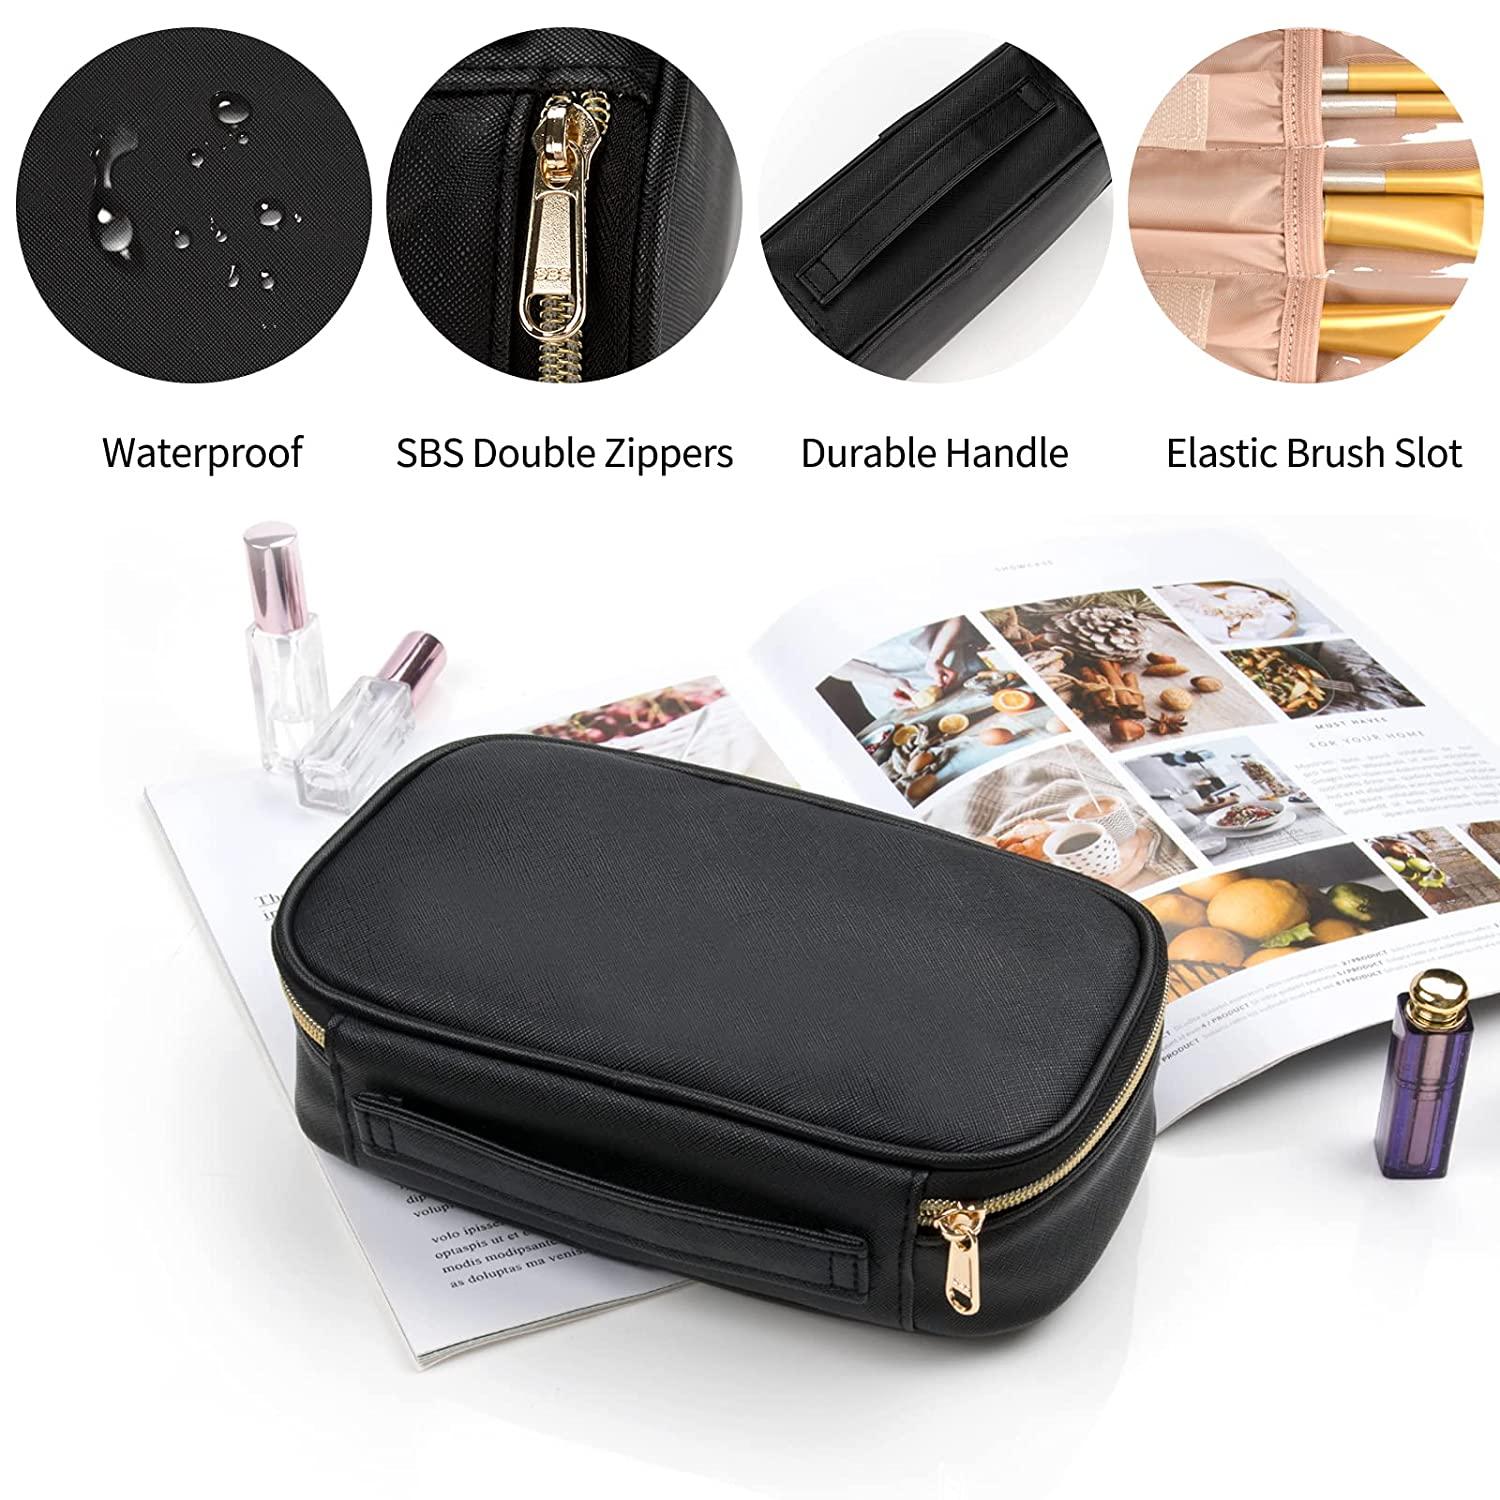 Embroidered Black Makeup Bag For Women With Multiple Compartments, High  Capacity, Portable And Travel Use